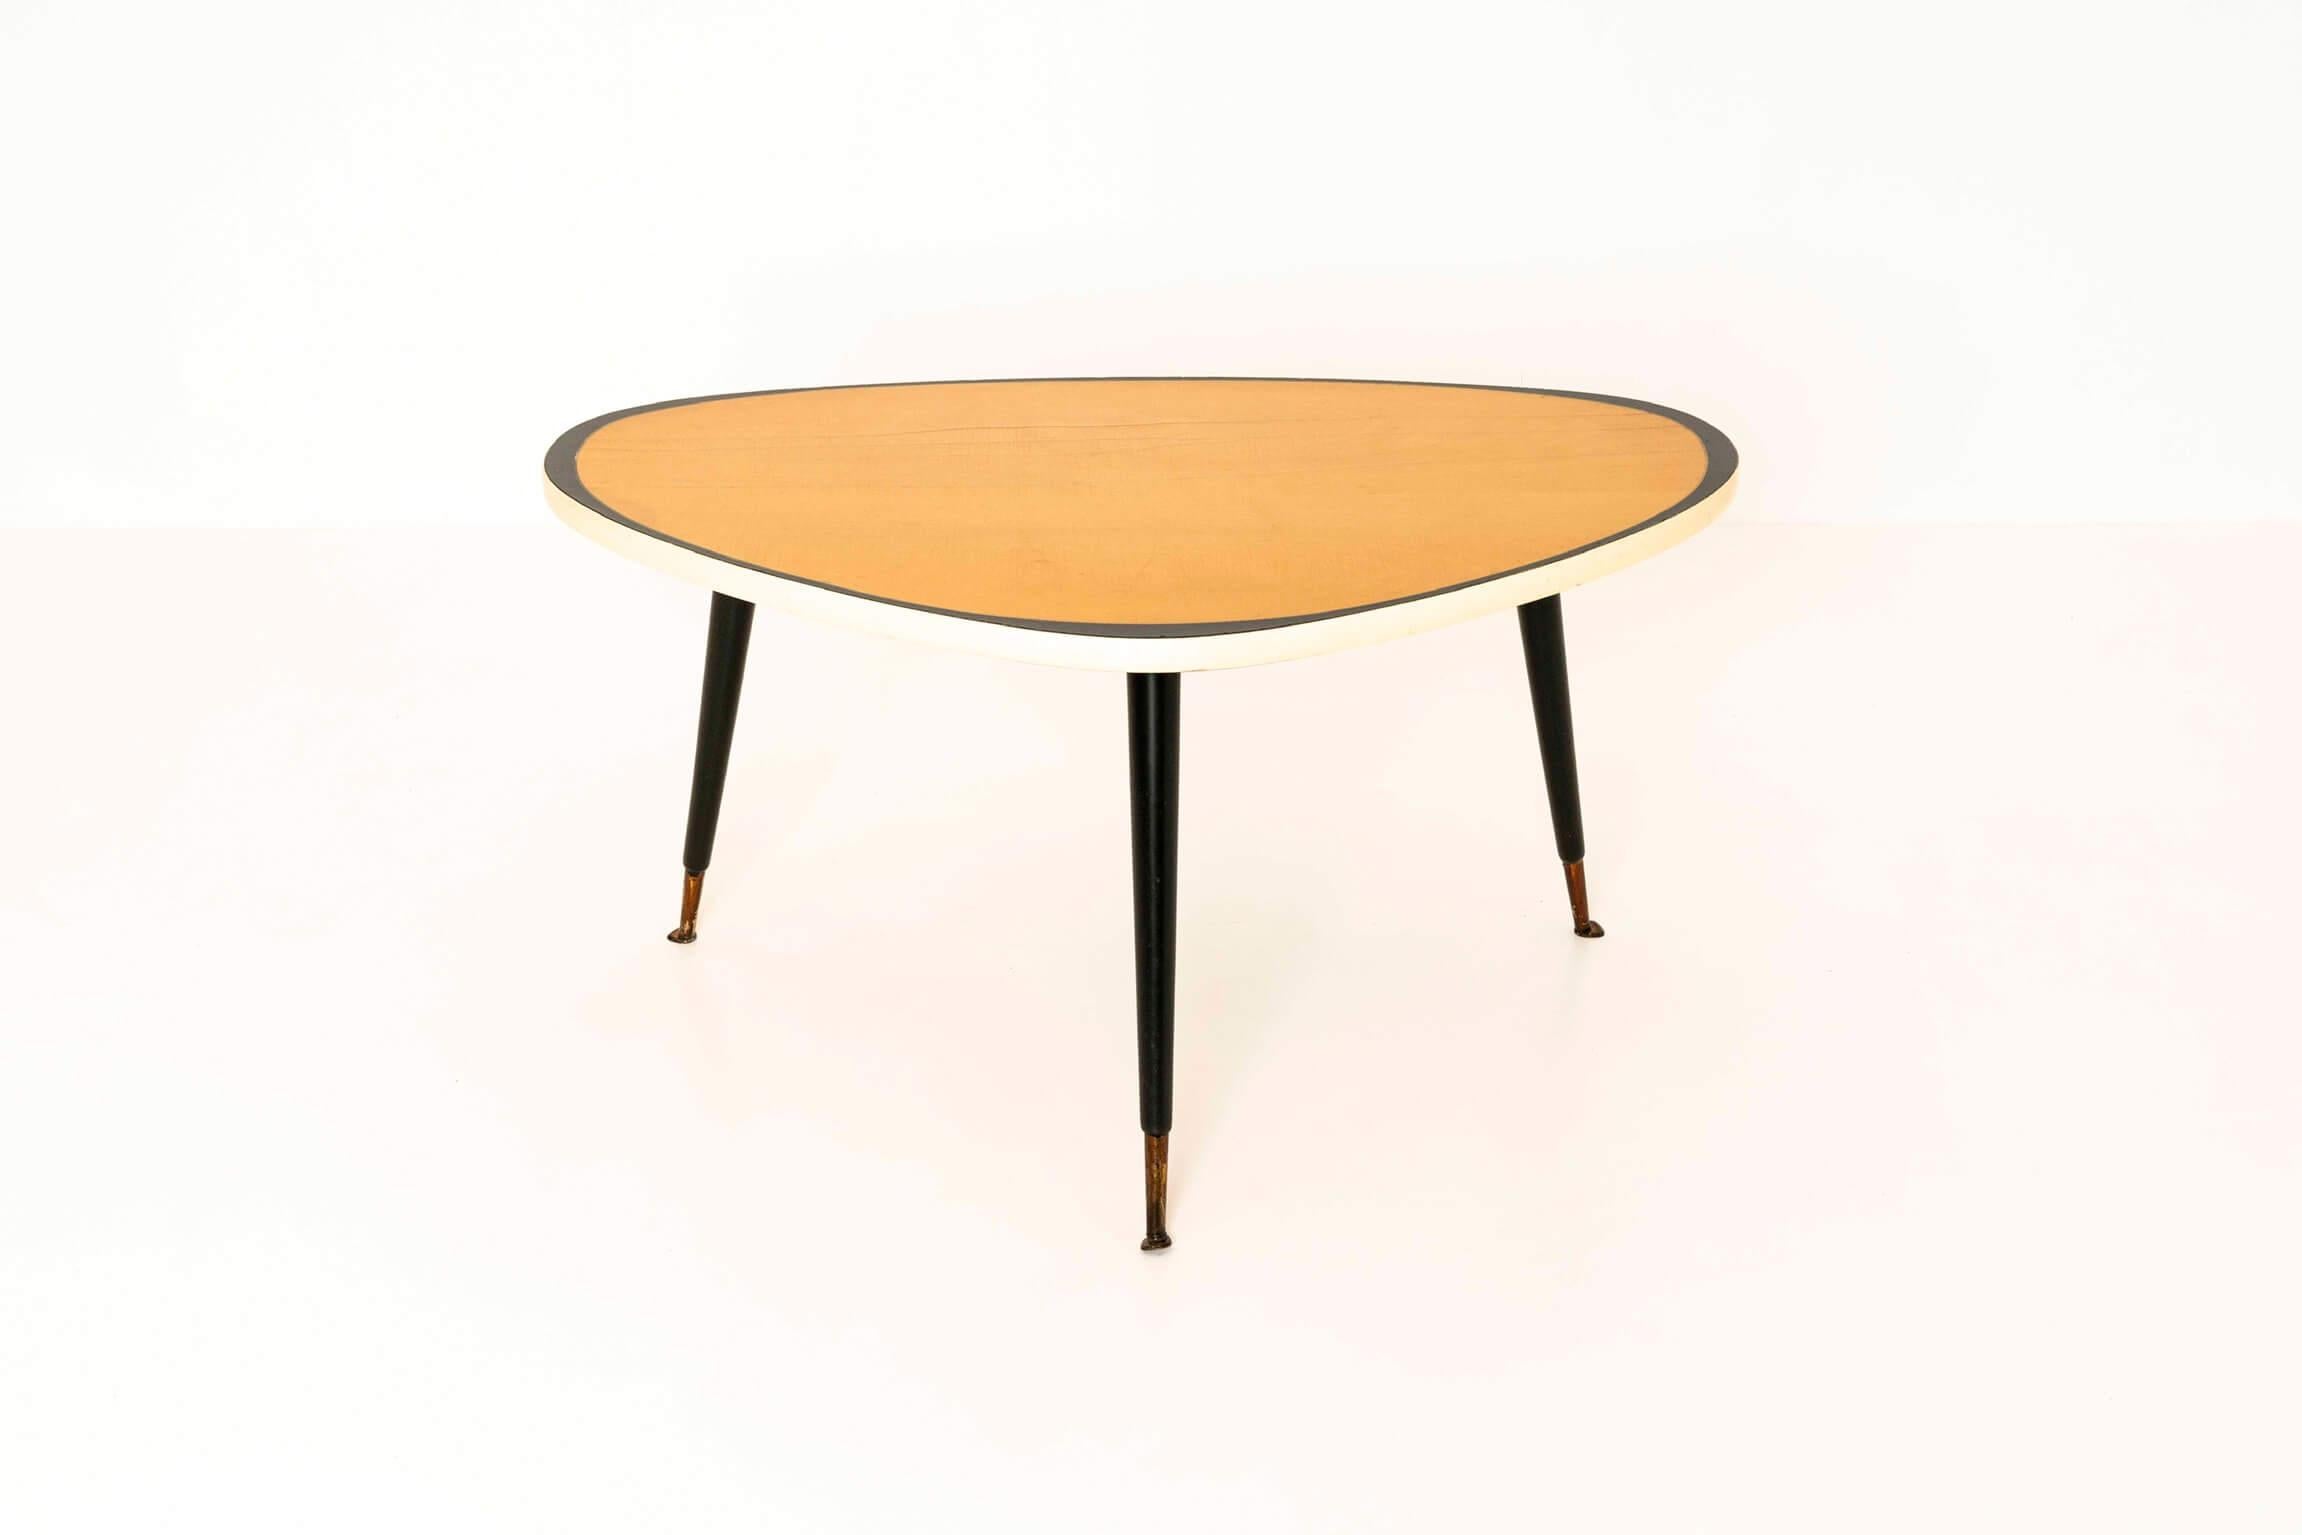 Nice triangular vintage coffee table from Germany, the 1950s. The table is manufactured in the style of, and could very well be by, Ilse möbel. The three black legs have brass feet. The table has a yellow top with, due to its age, stripes in the